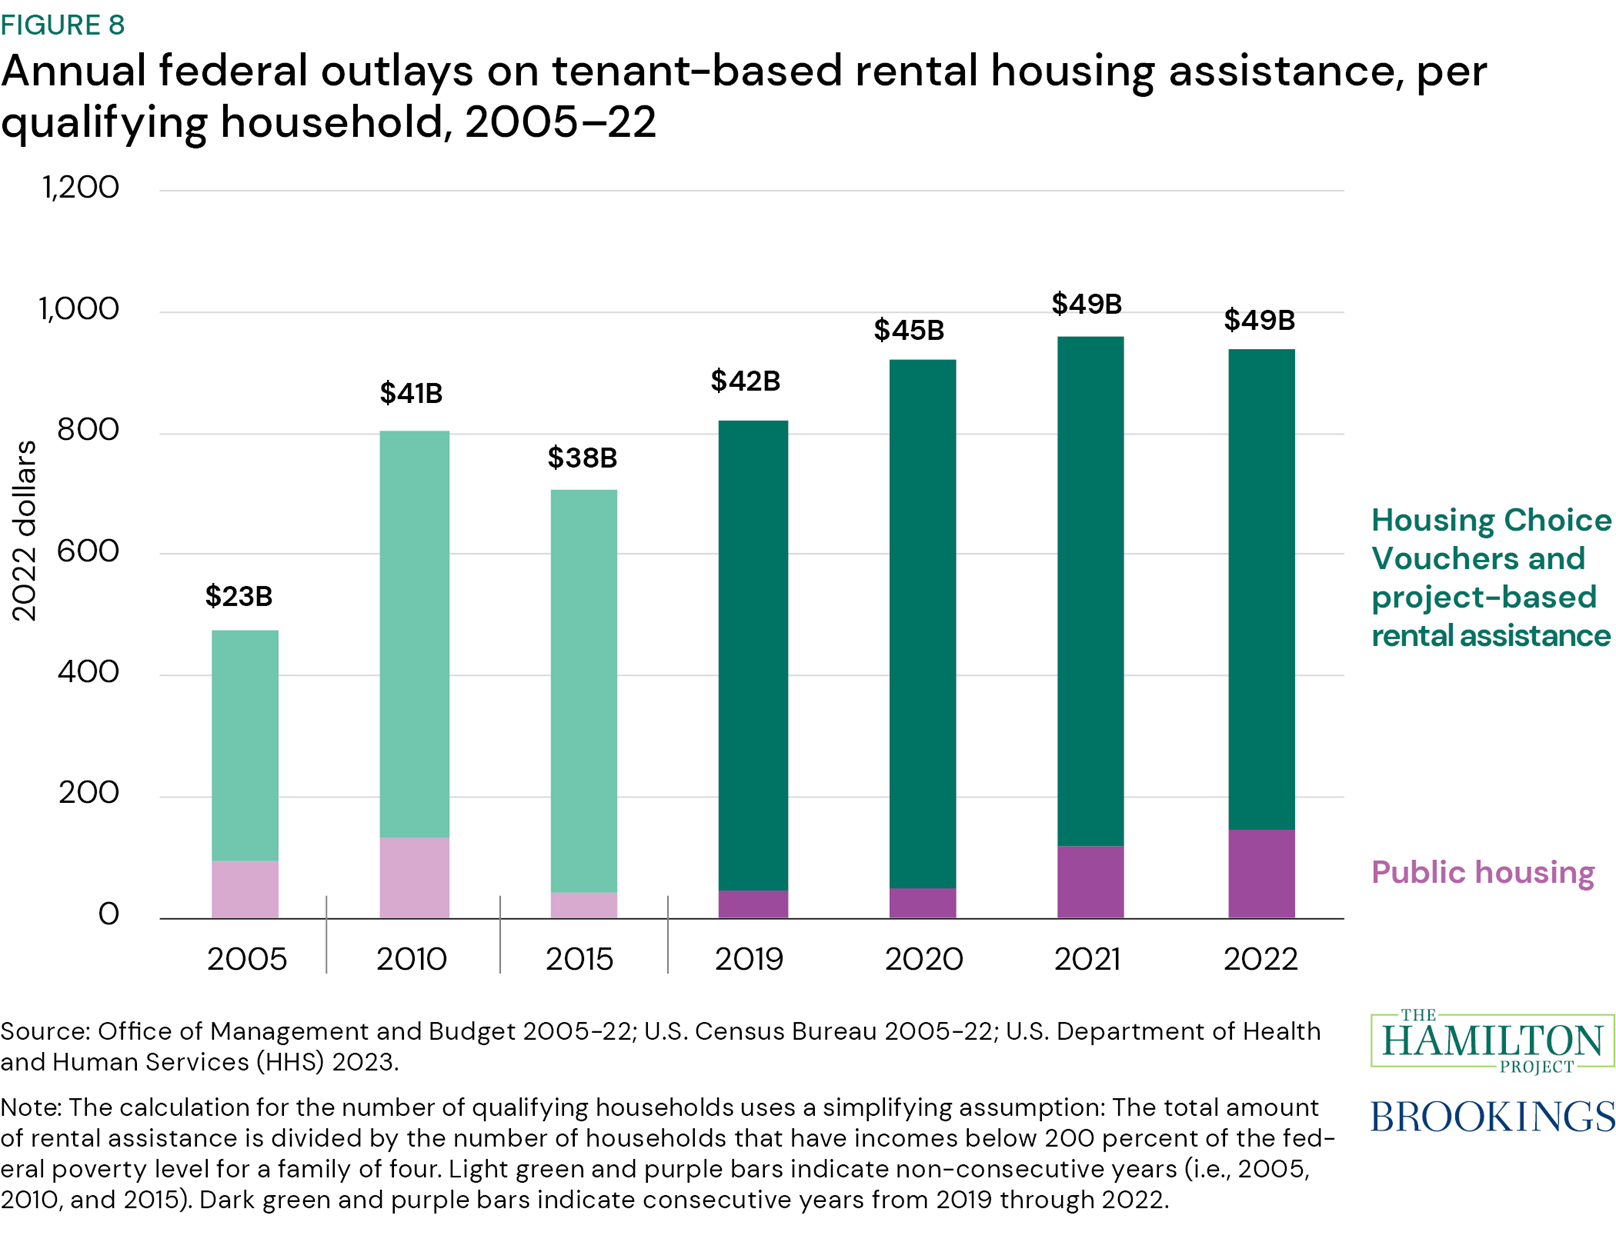 Figure 8: Annual federal outlays on tenant-based rental housing assistance, per qualifying household, 2005–22. Figure 8 shows annual federal outlays for housing assistance per potentially eligible household (defined as a household with income below 200 percent of the poverty threshold for a family of four) between 2005 and 2022.